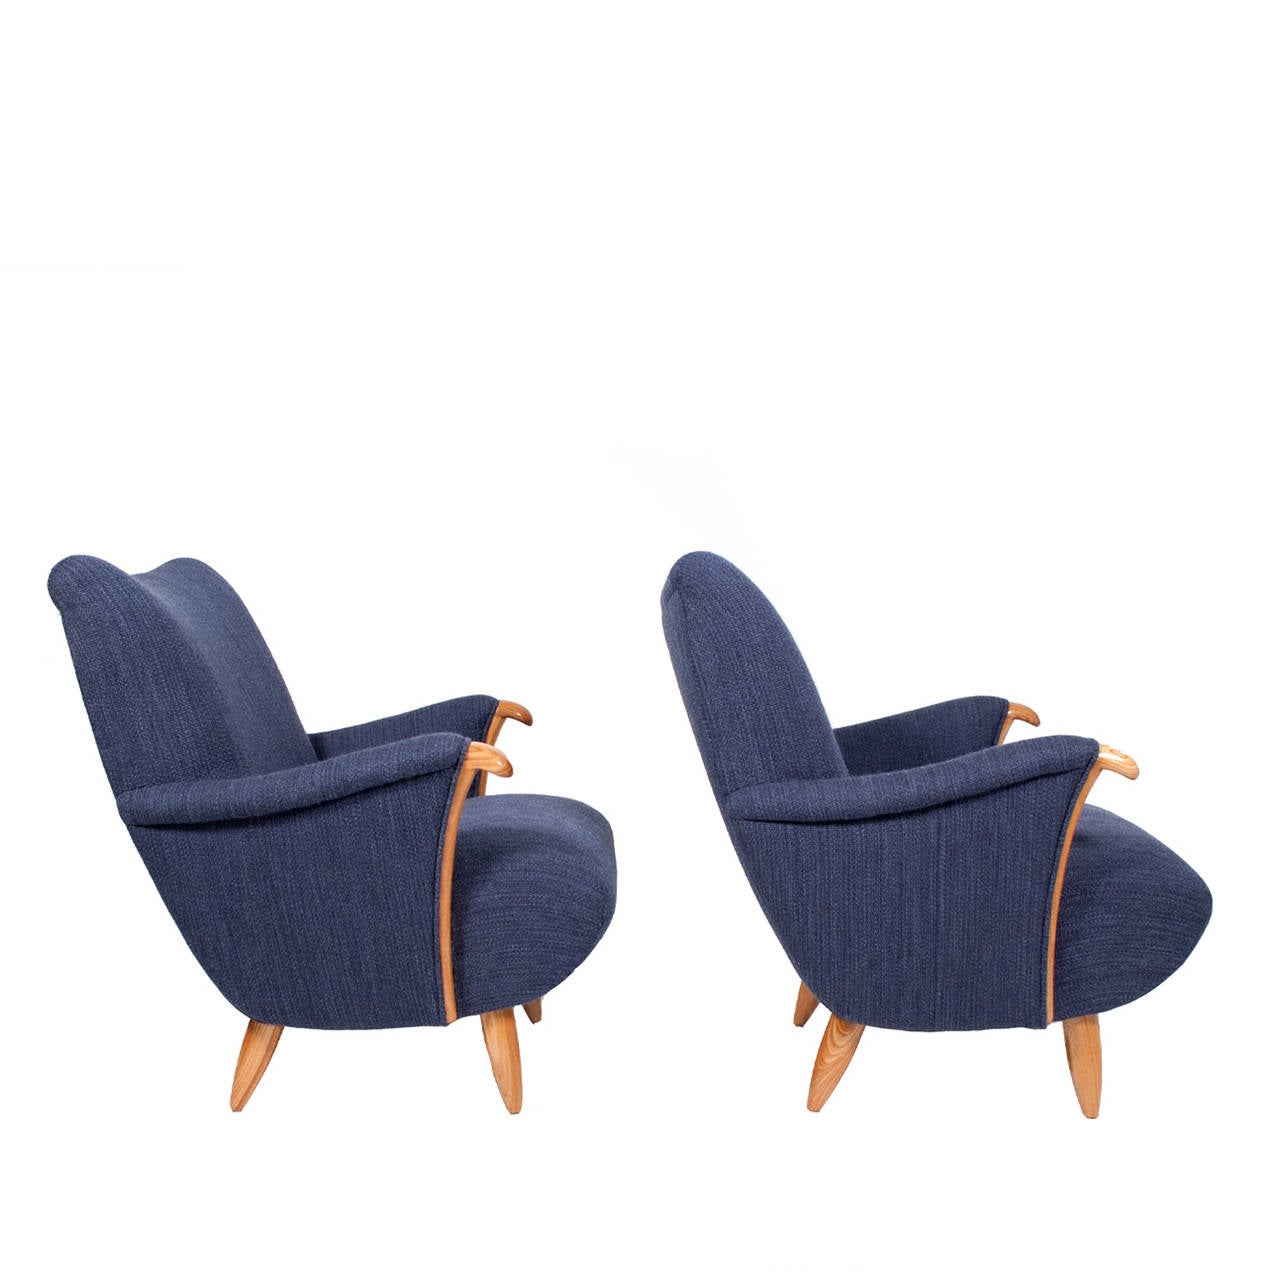 Pair of organic shaped easy chairs elmwood arms and cone shape legs, newly upholstered in 100% wool fabric from Designtex.